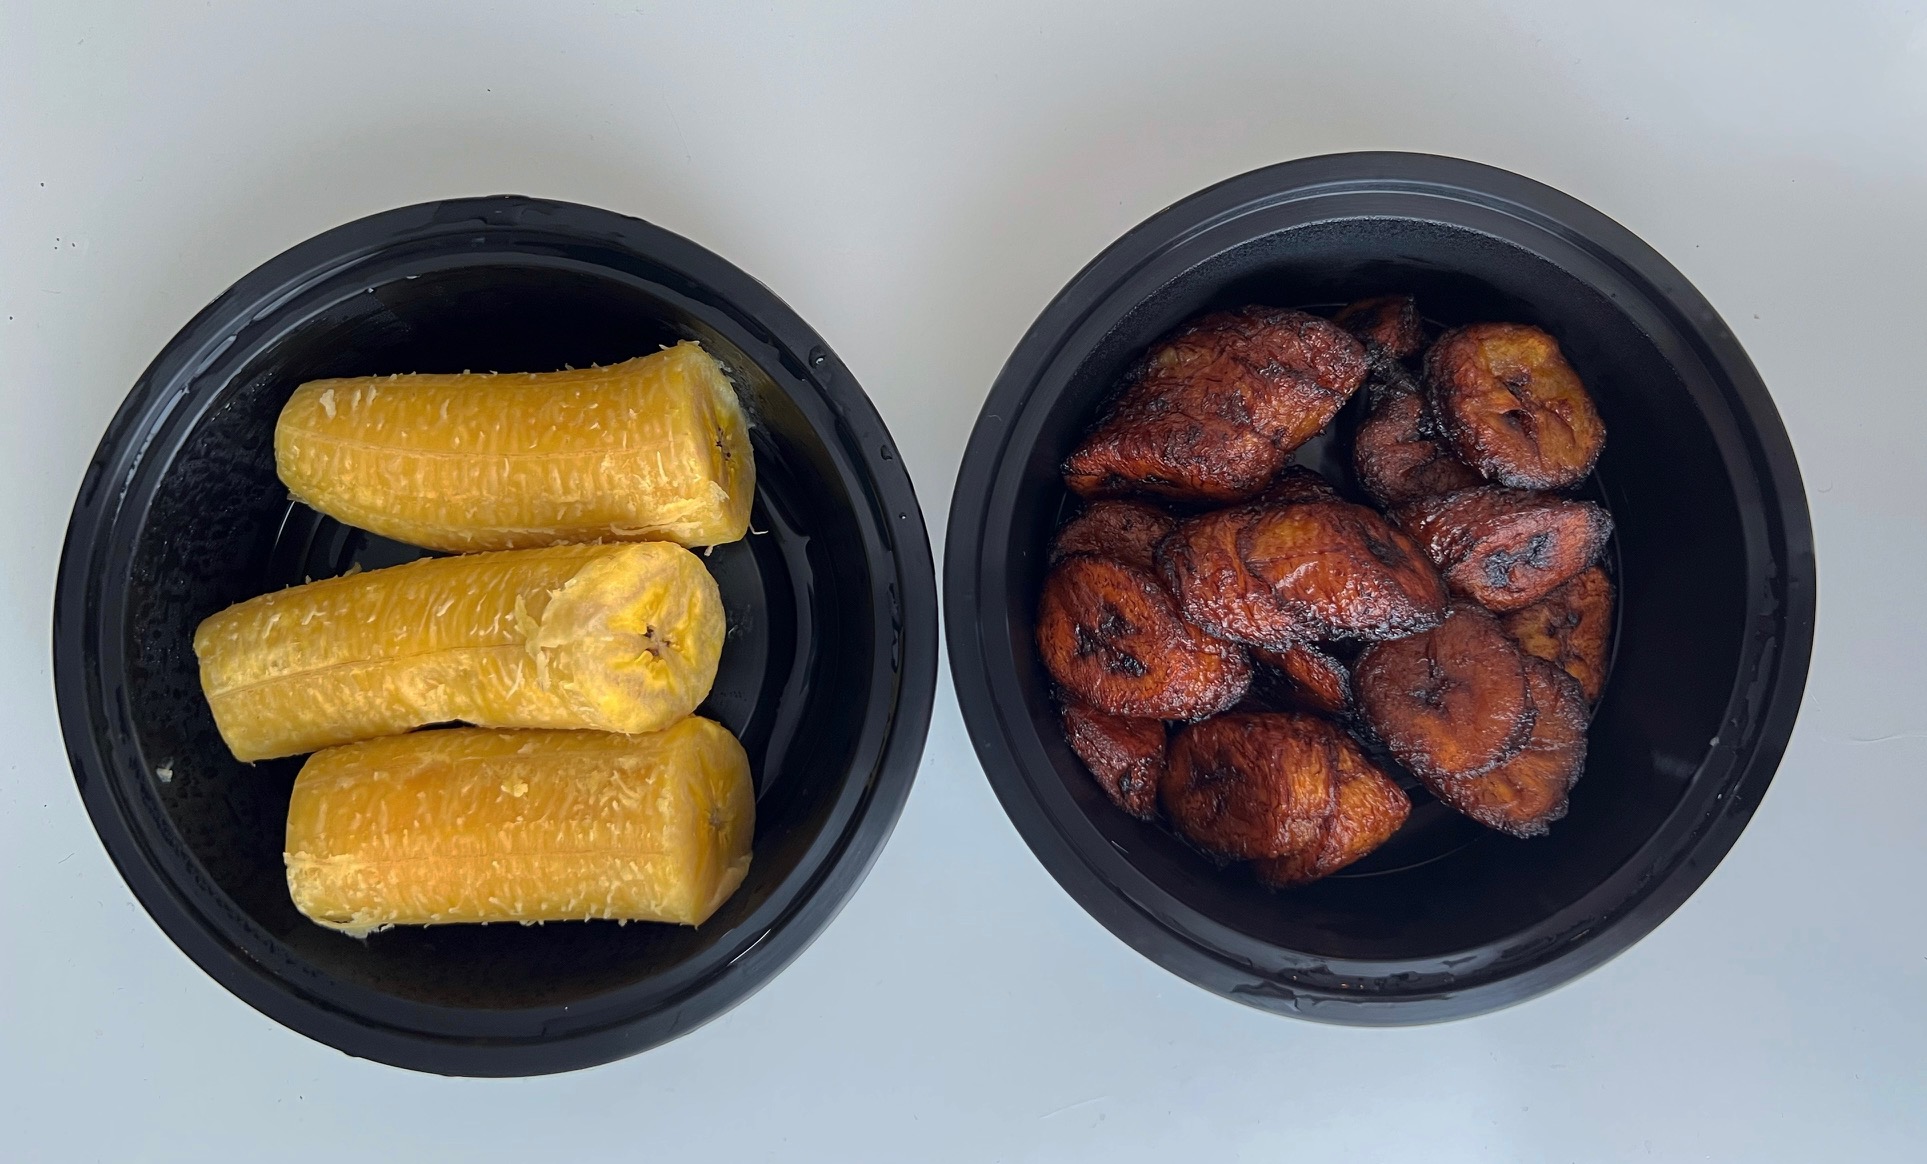 On a white table, there are two black circular containers with plantains. On the left, there are three peeled boiled plantains, and on the right, there are many dark brown medallions of fried plantains. Photo by Alyssa Buckley.